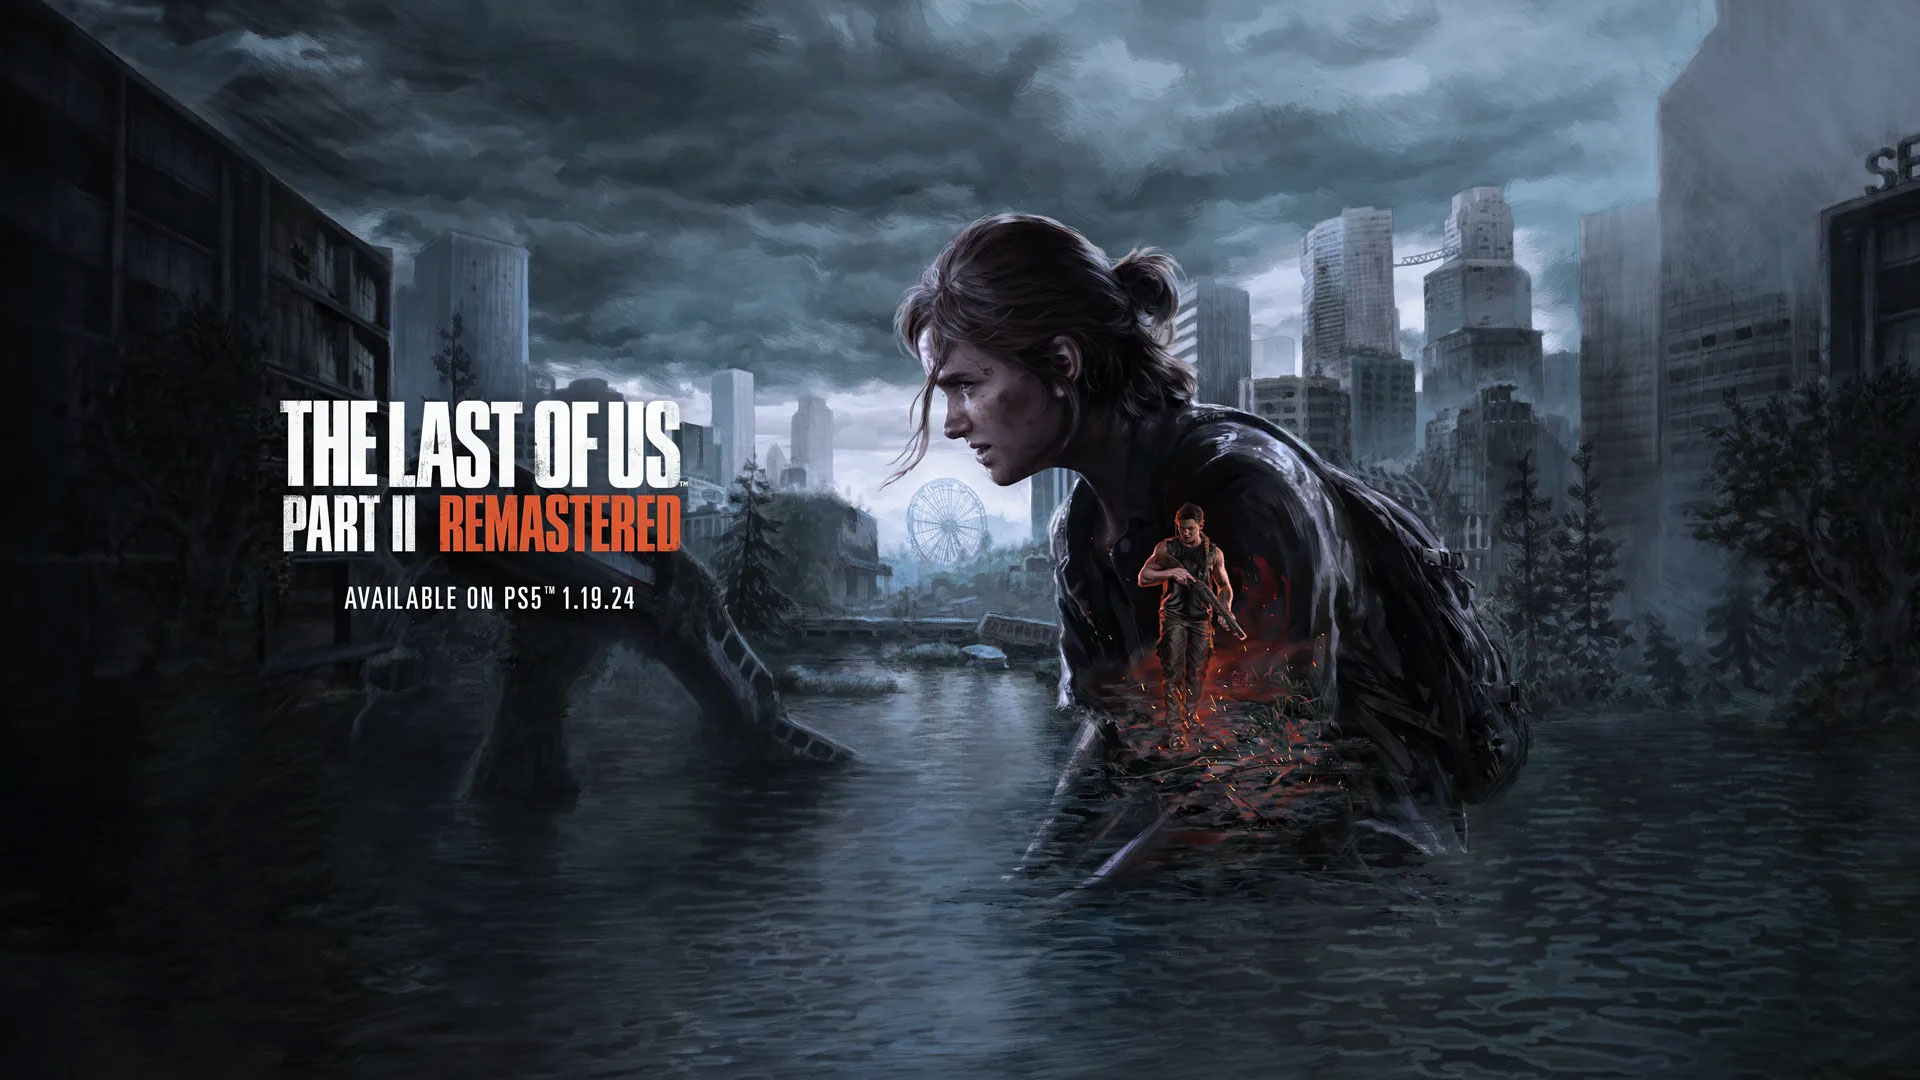 The Last of Us Part II Remastered will feature a new game mode